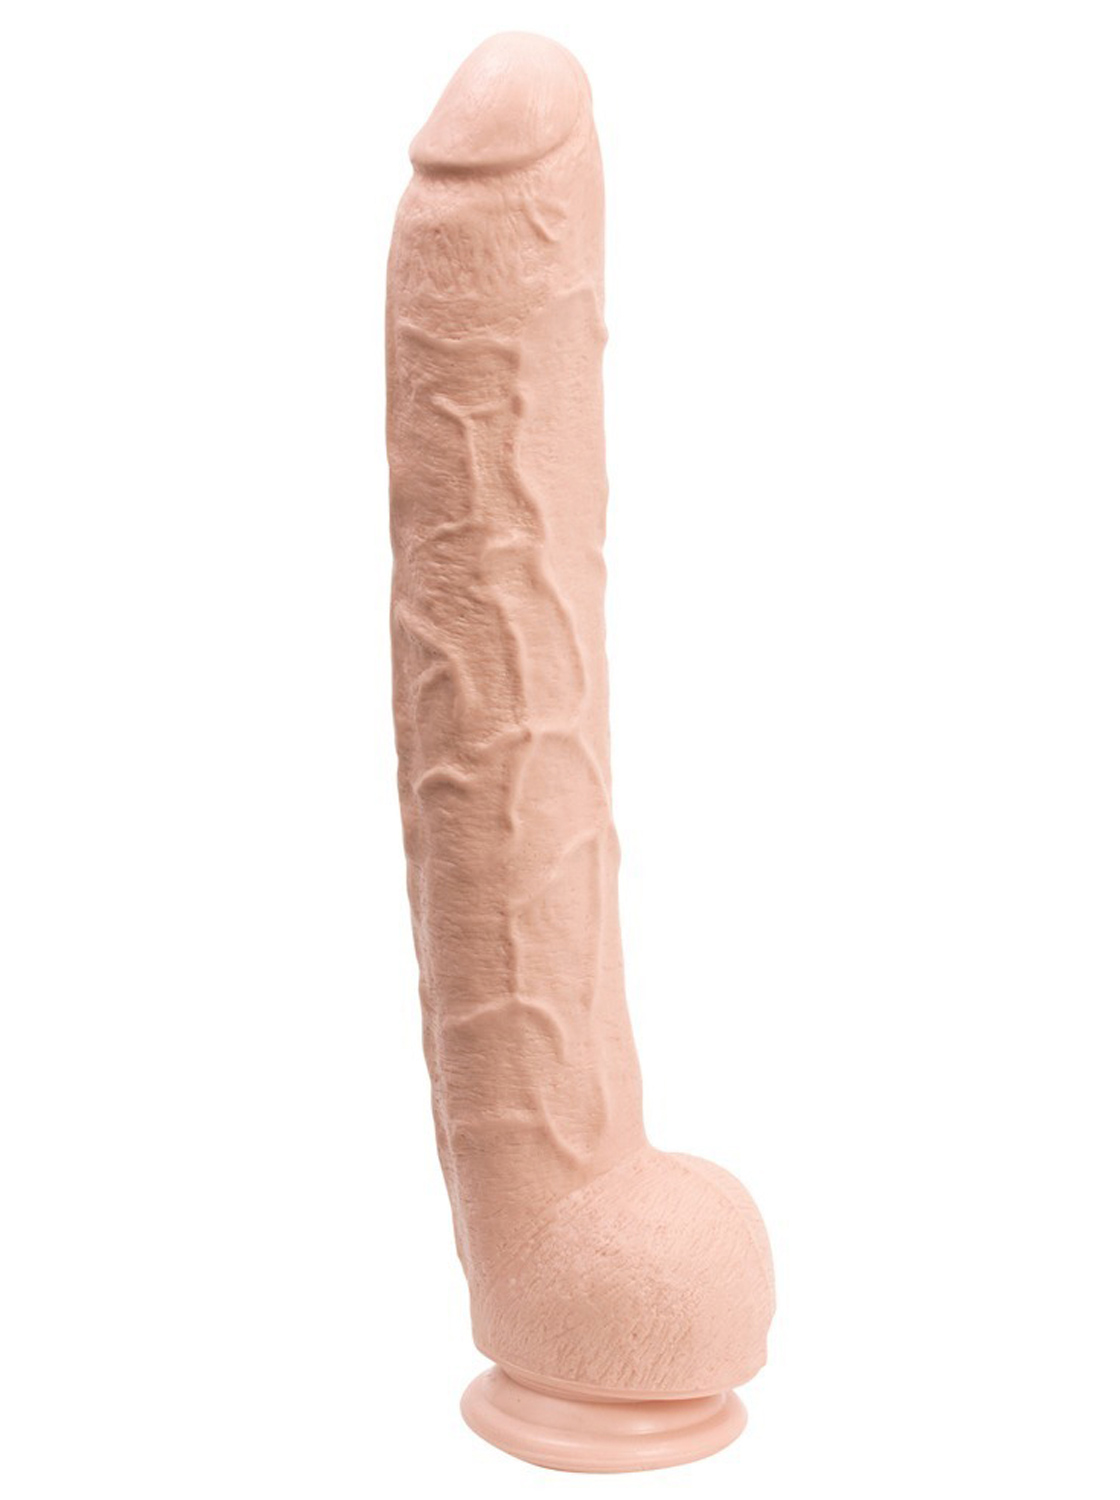 cole hedrick recommends giant dildo pic